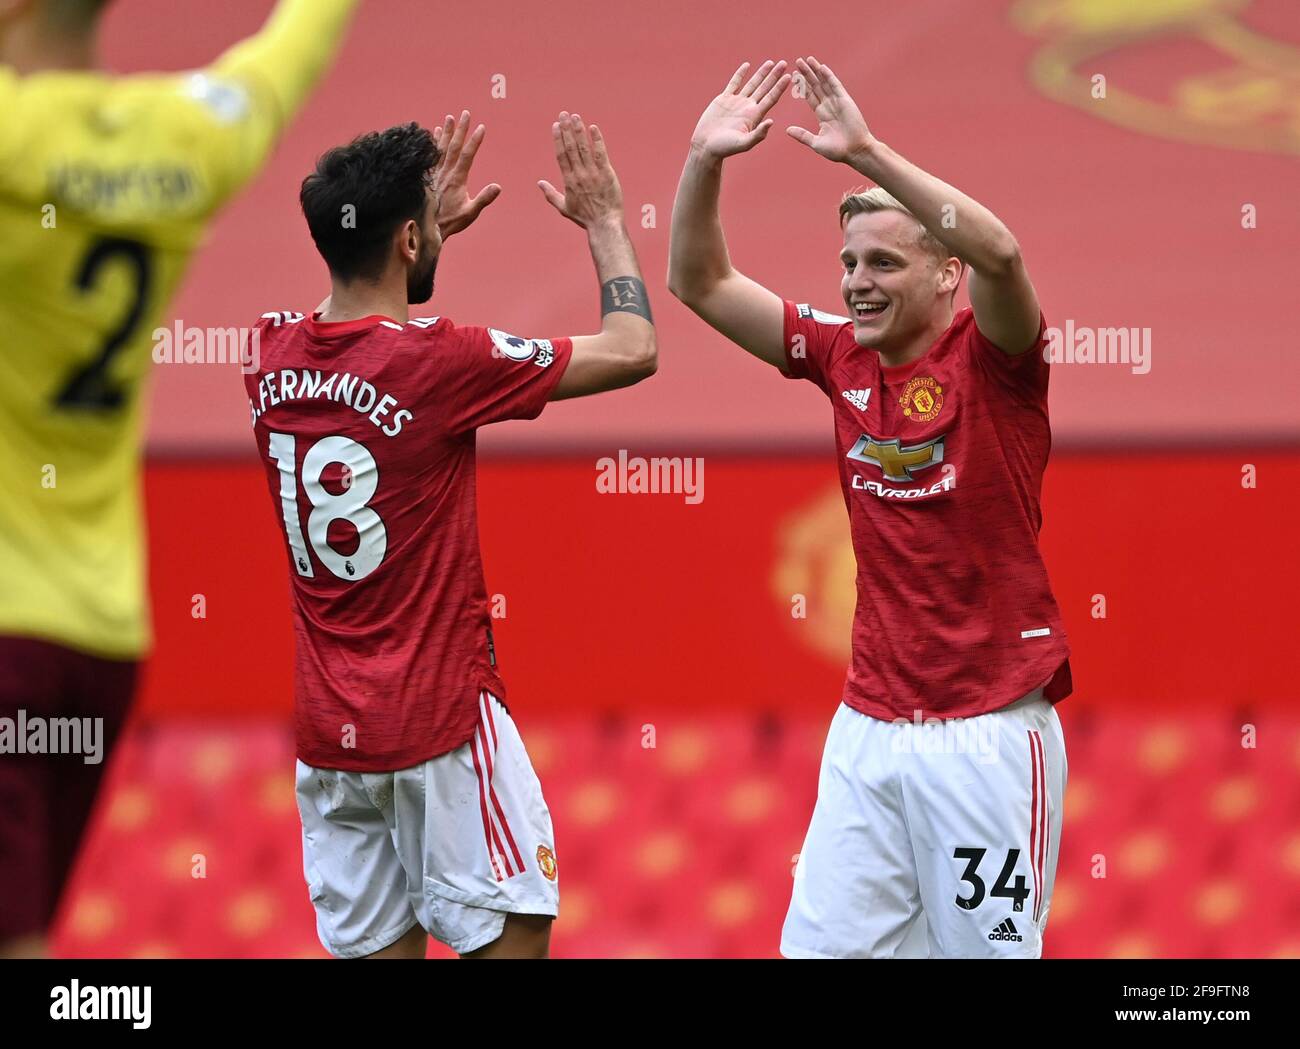 Manchester United's Bruno Fernandes and Donny van de Beek celebrate their side's third goal of the game, scored by Edinson Cavani (not pictured) during the Premier League match at Old Trafford, Manchester. Picture date: Sunday April 18, 2021. Stock Photo